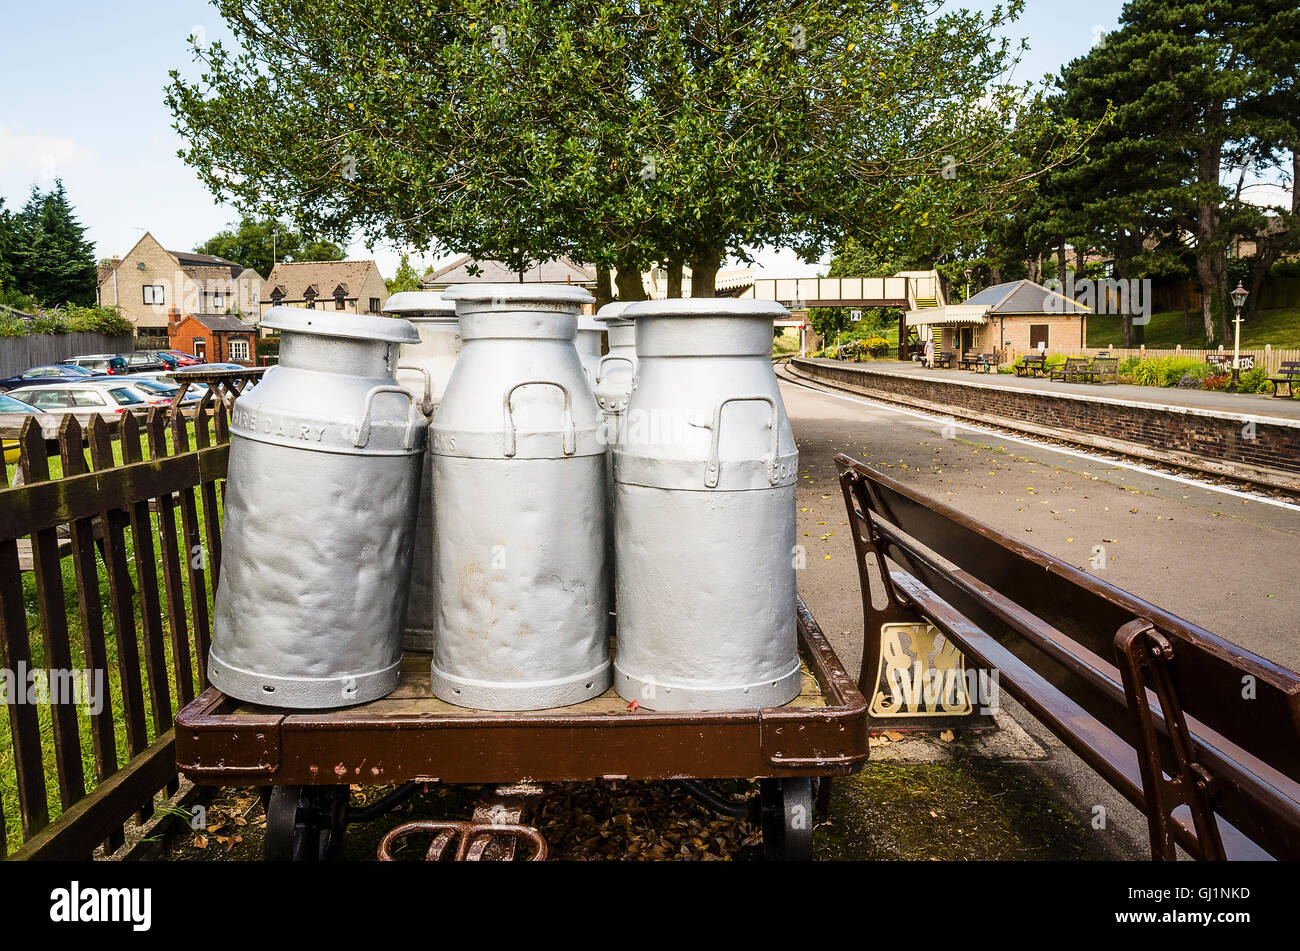 Old milk churns of the type once transported by rail in the UK seen at Winchcombe railway station Stock Photo